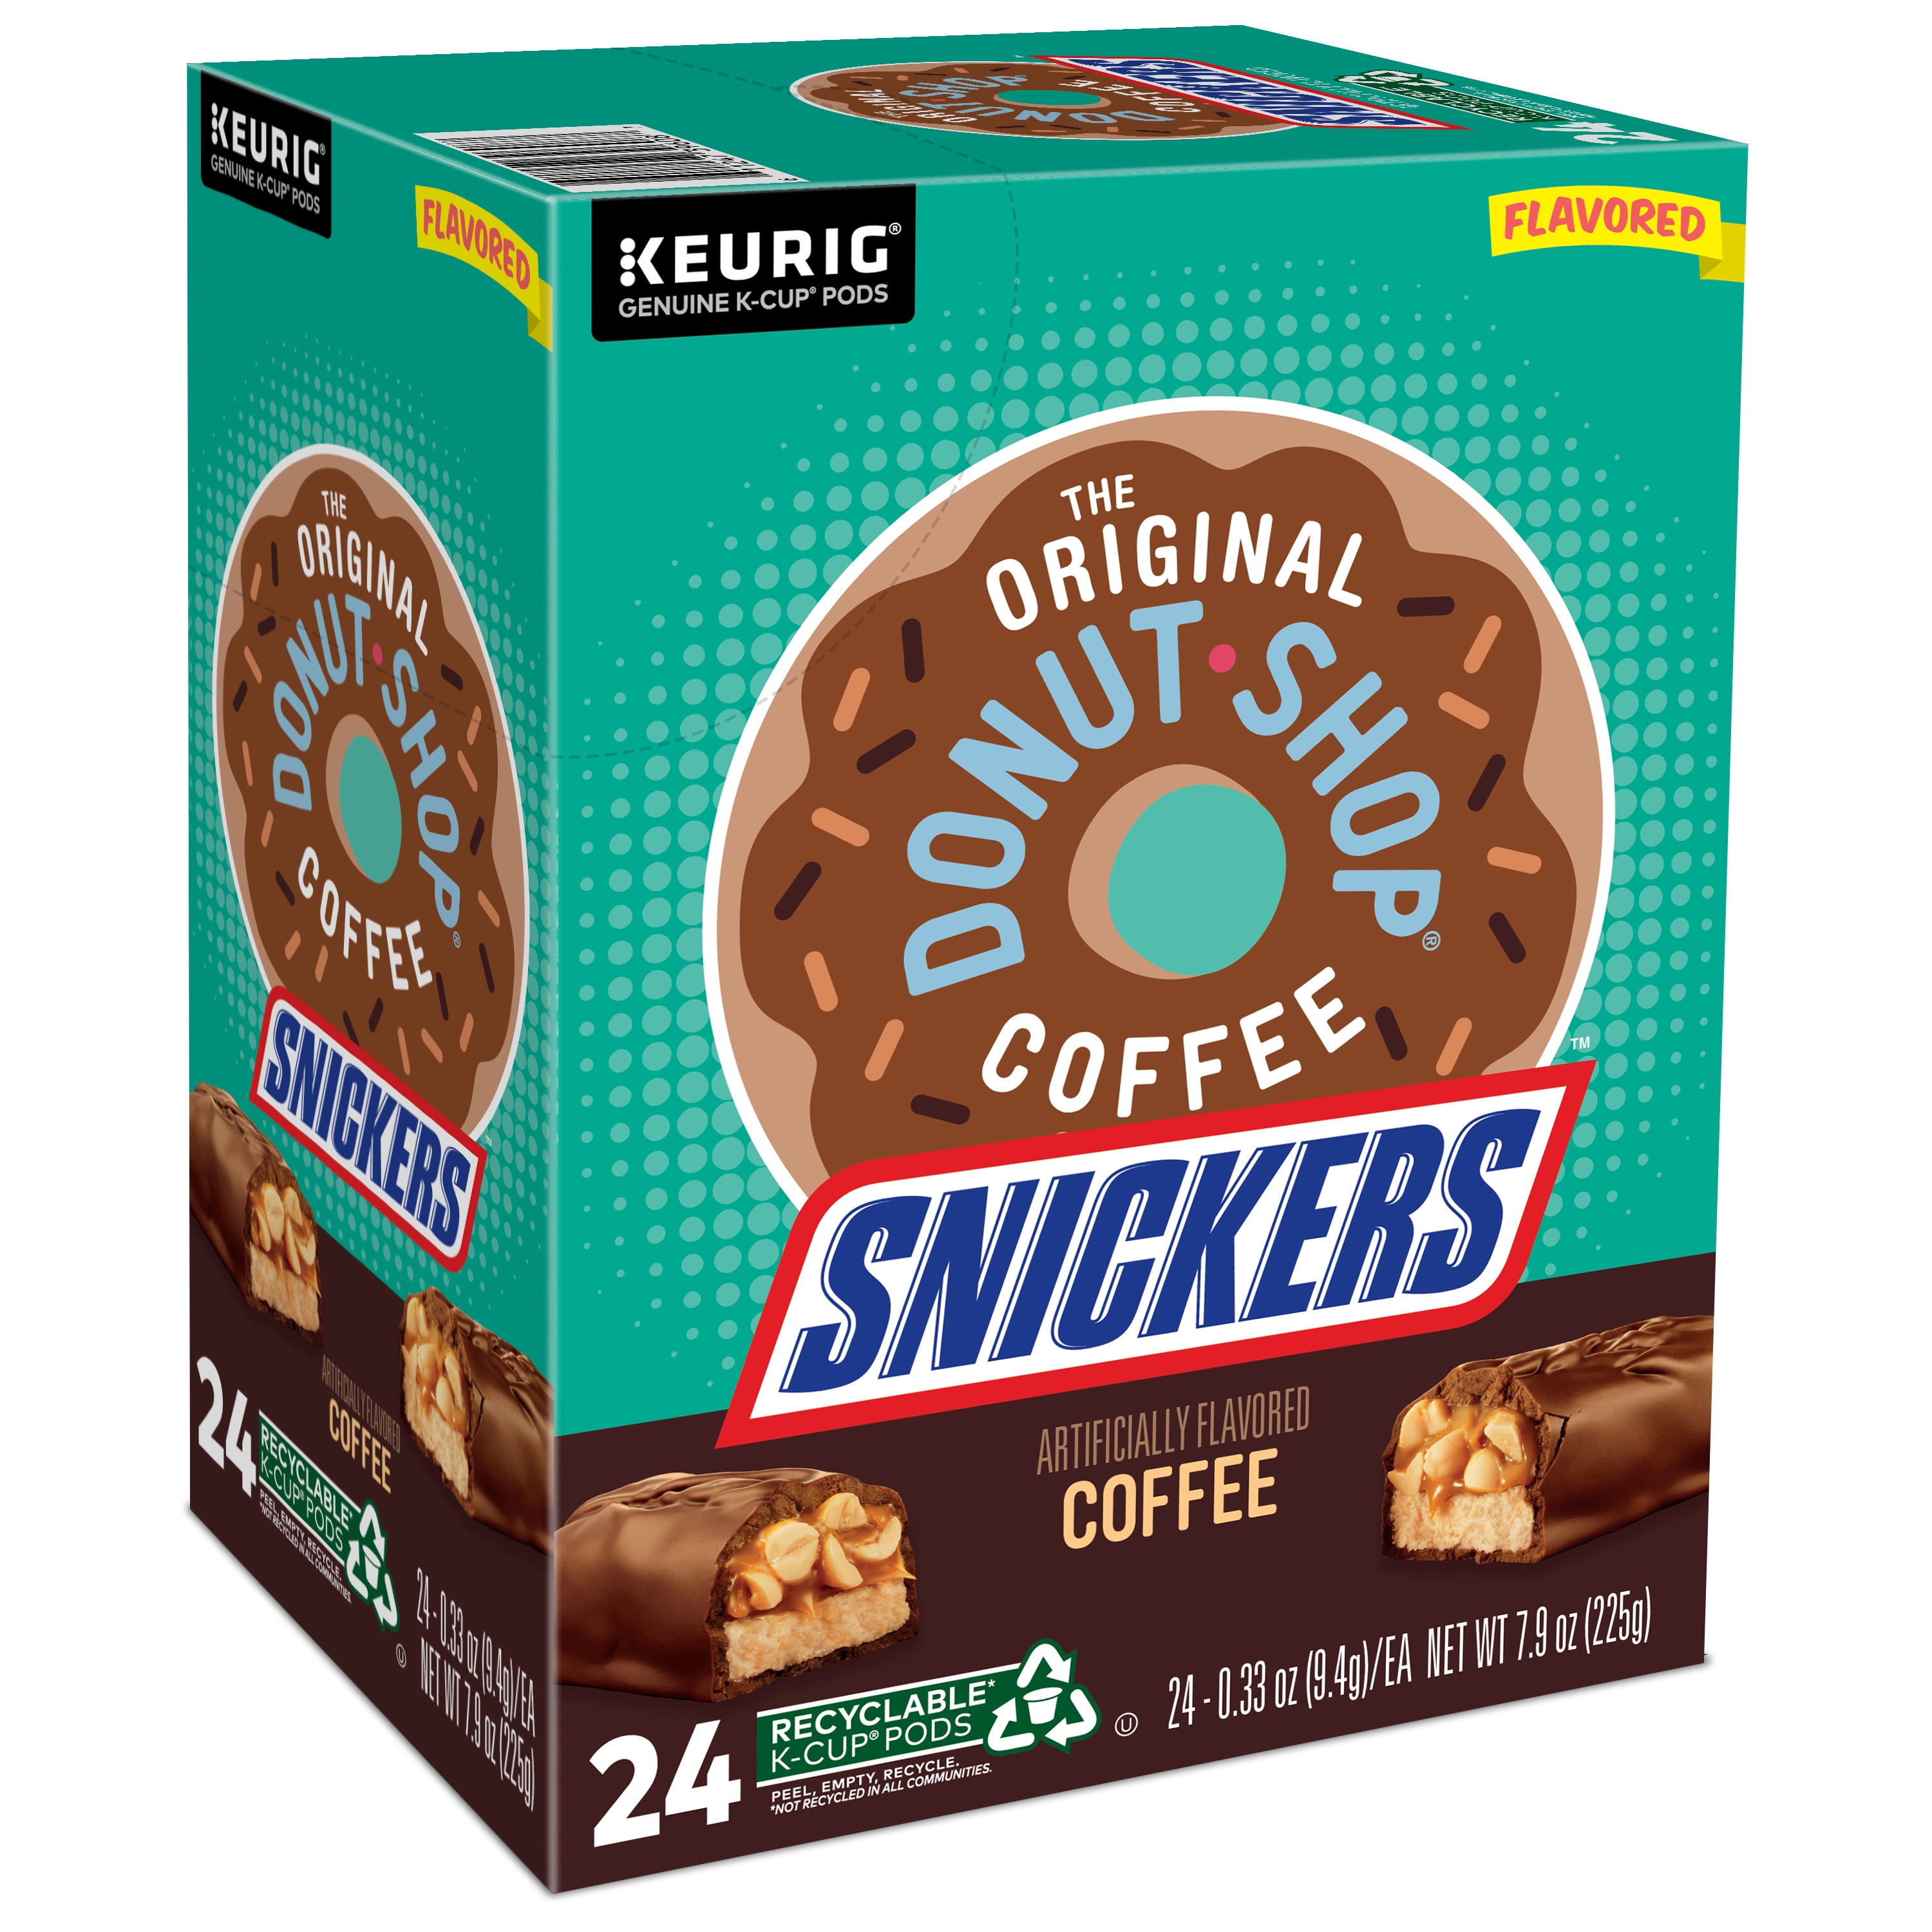 The Original Donut Shop, Snickers Flavored K-Cup Coffee Pods, 24 Count